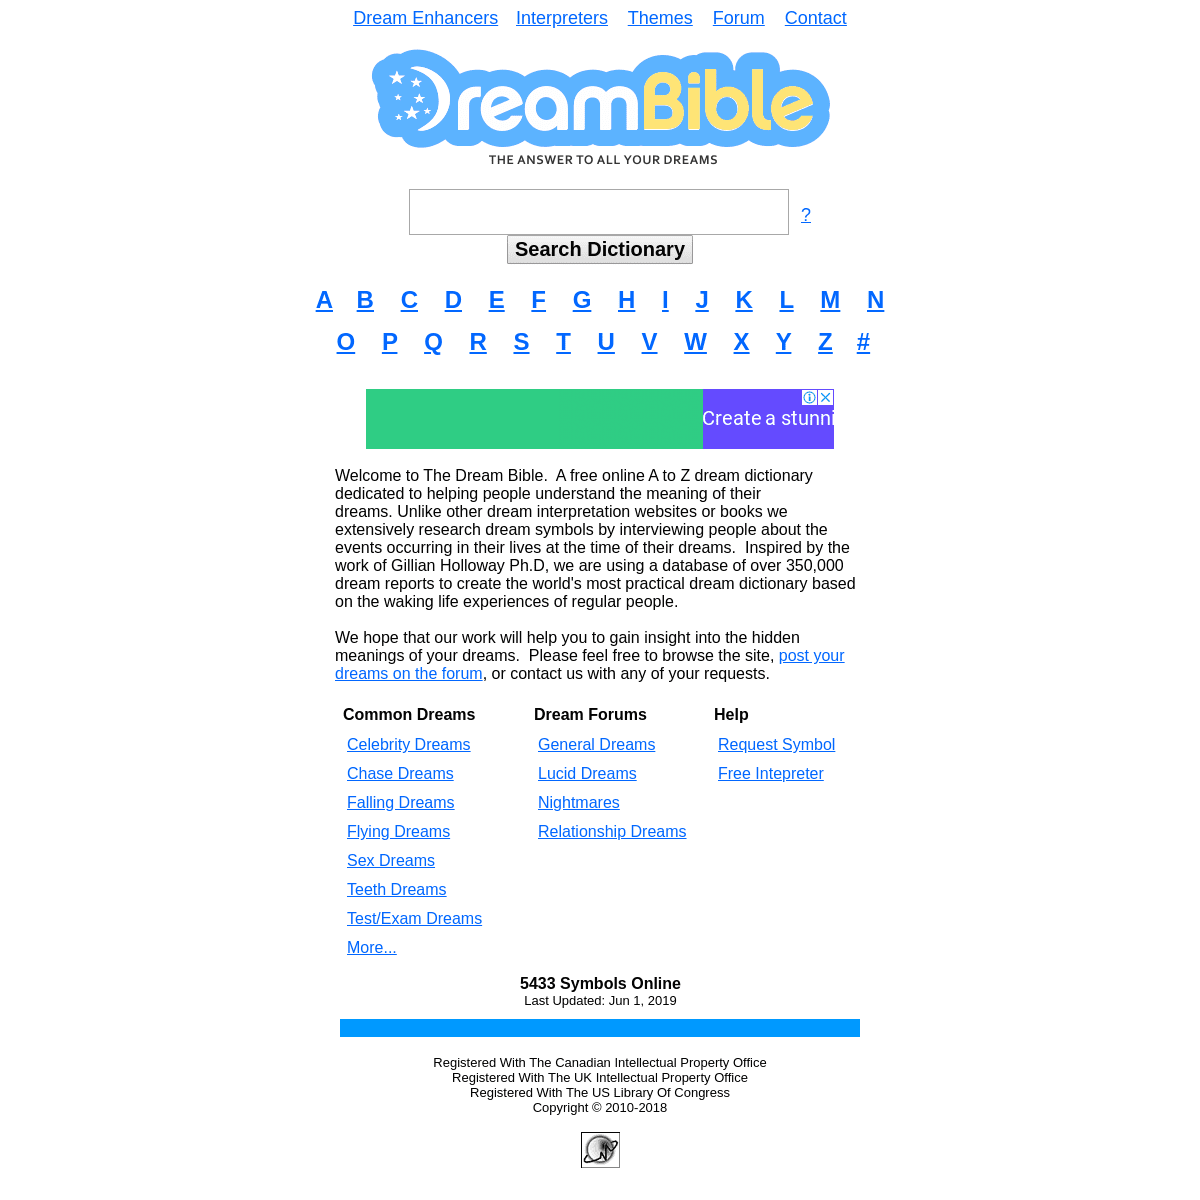 A complete backup of dreambible.com